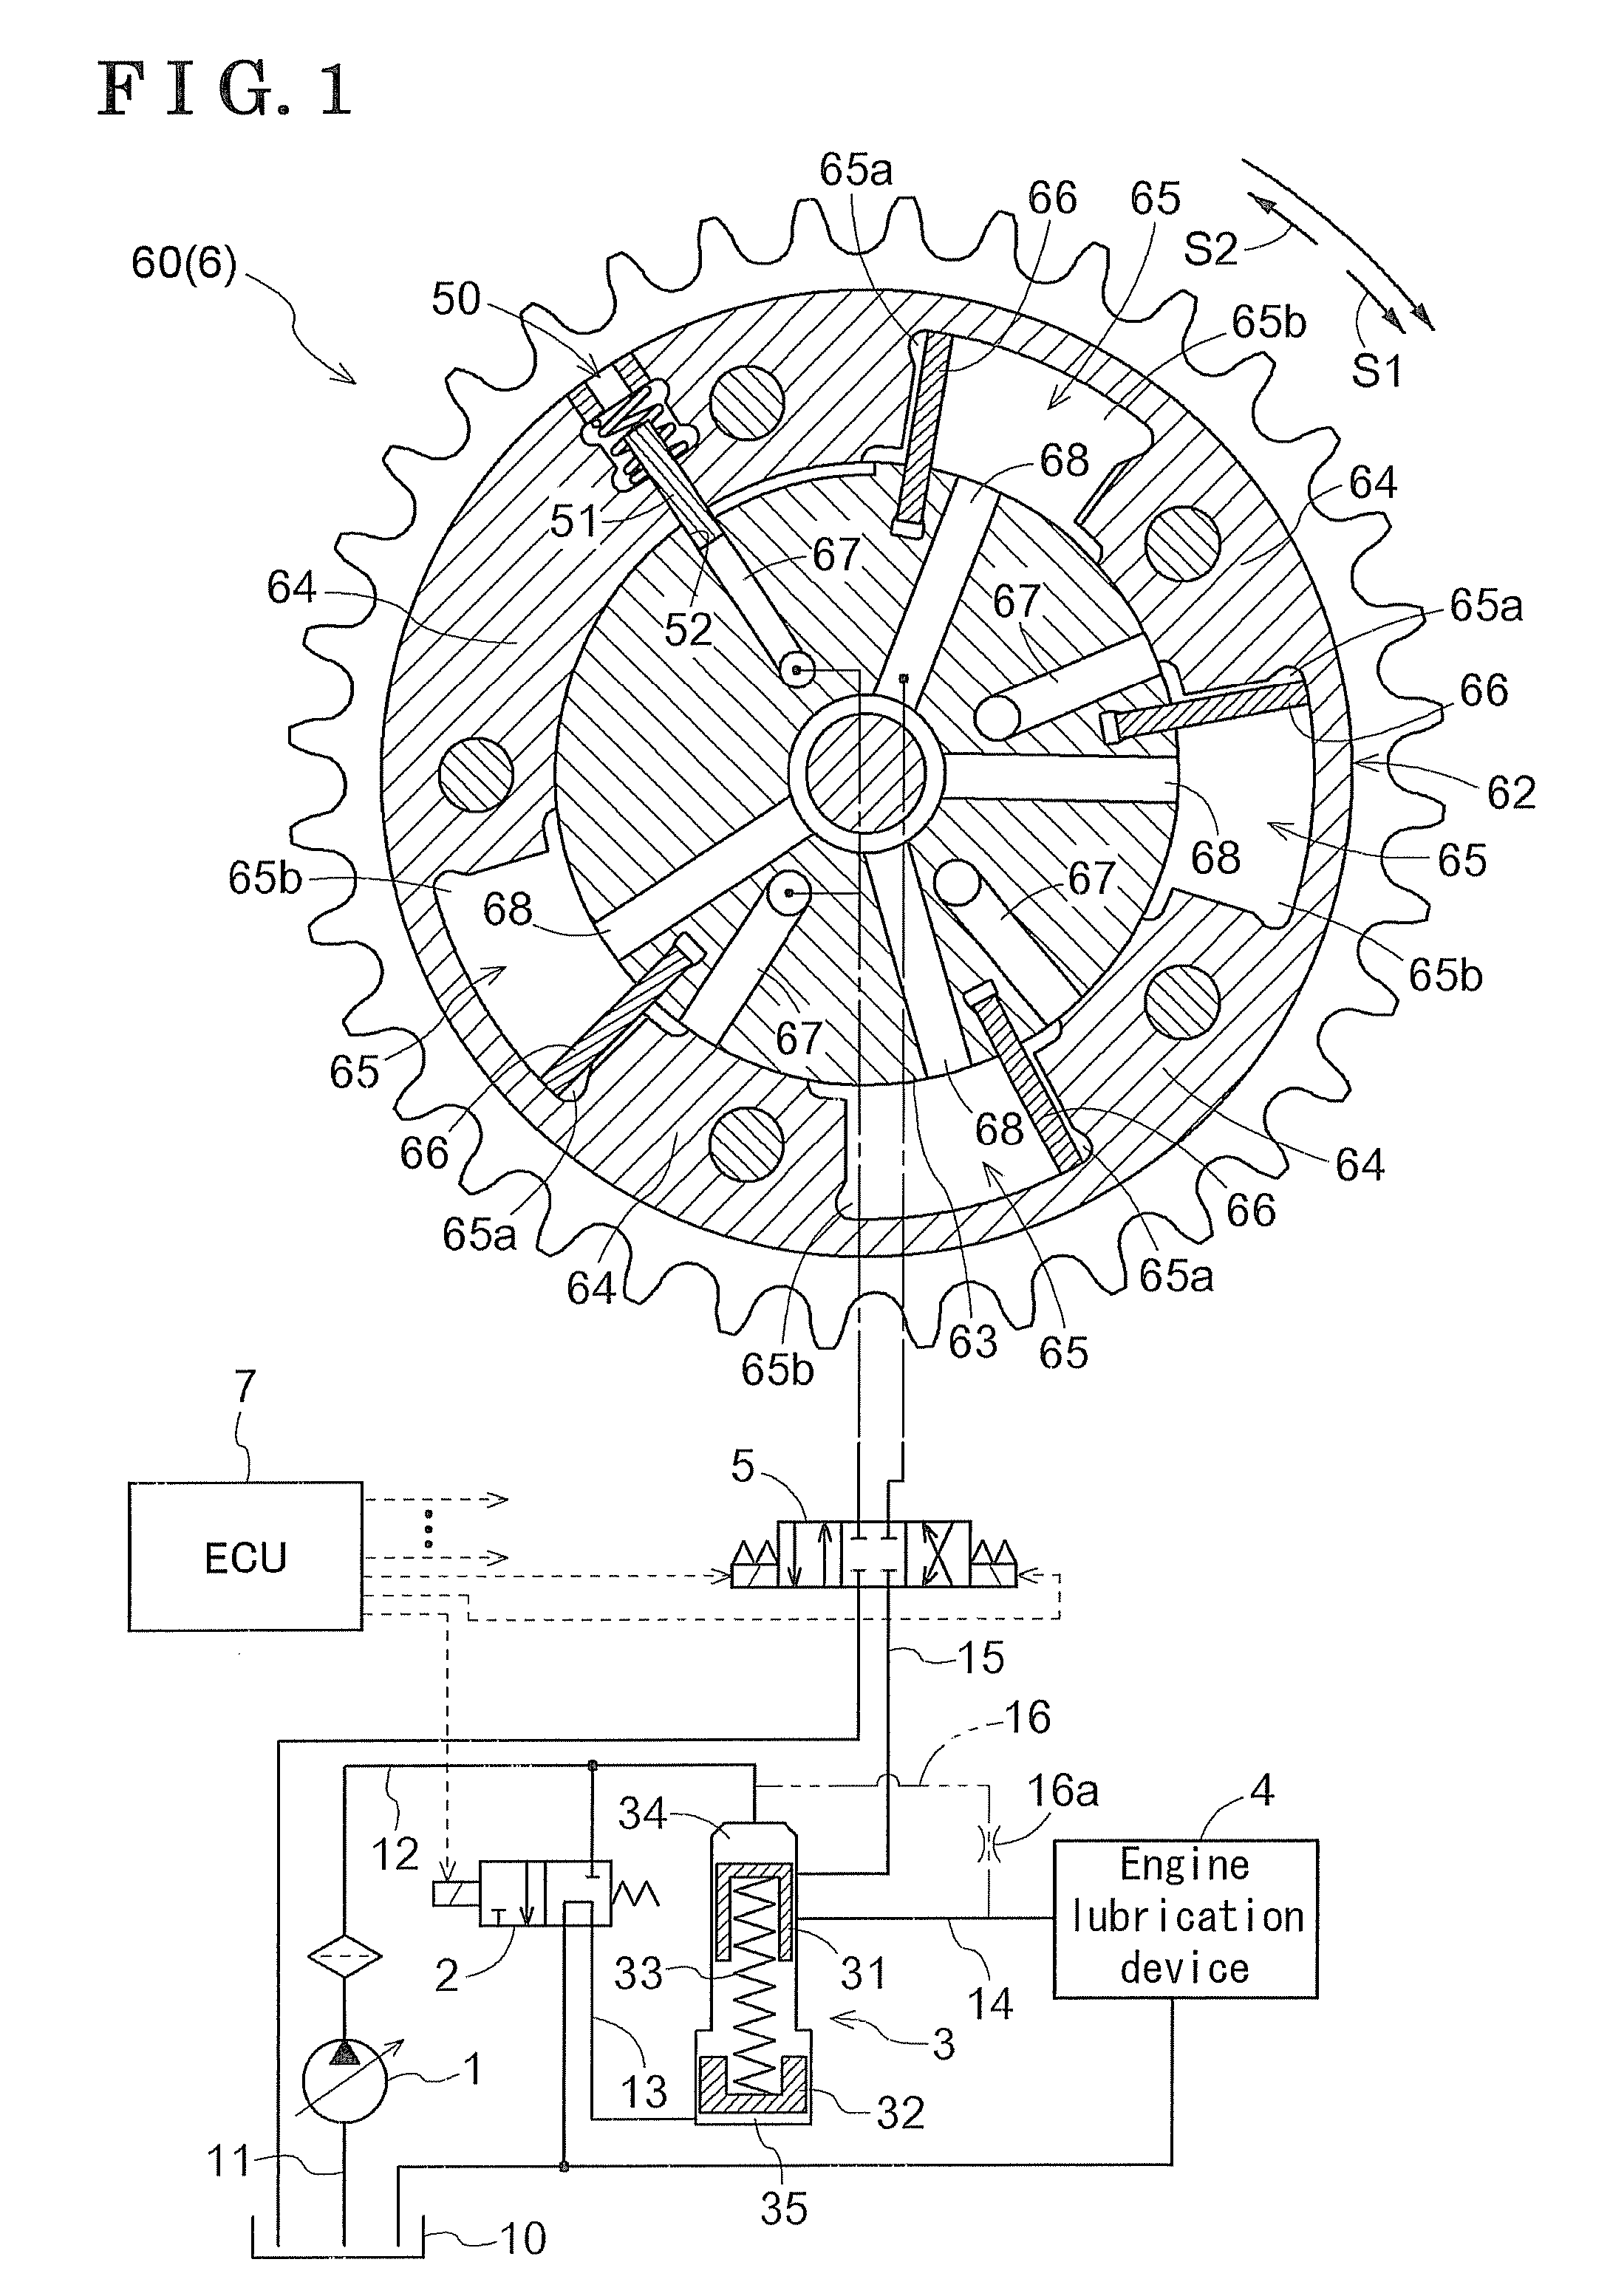 Oil supplying apparatus for vehicle